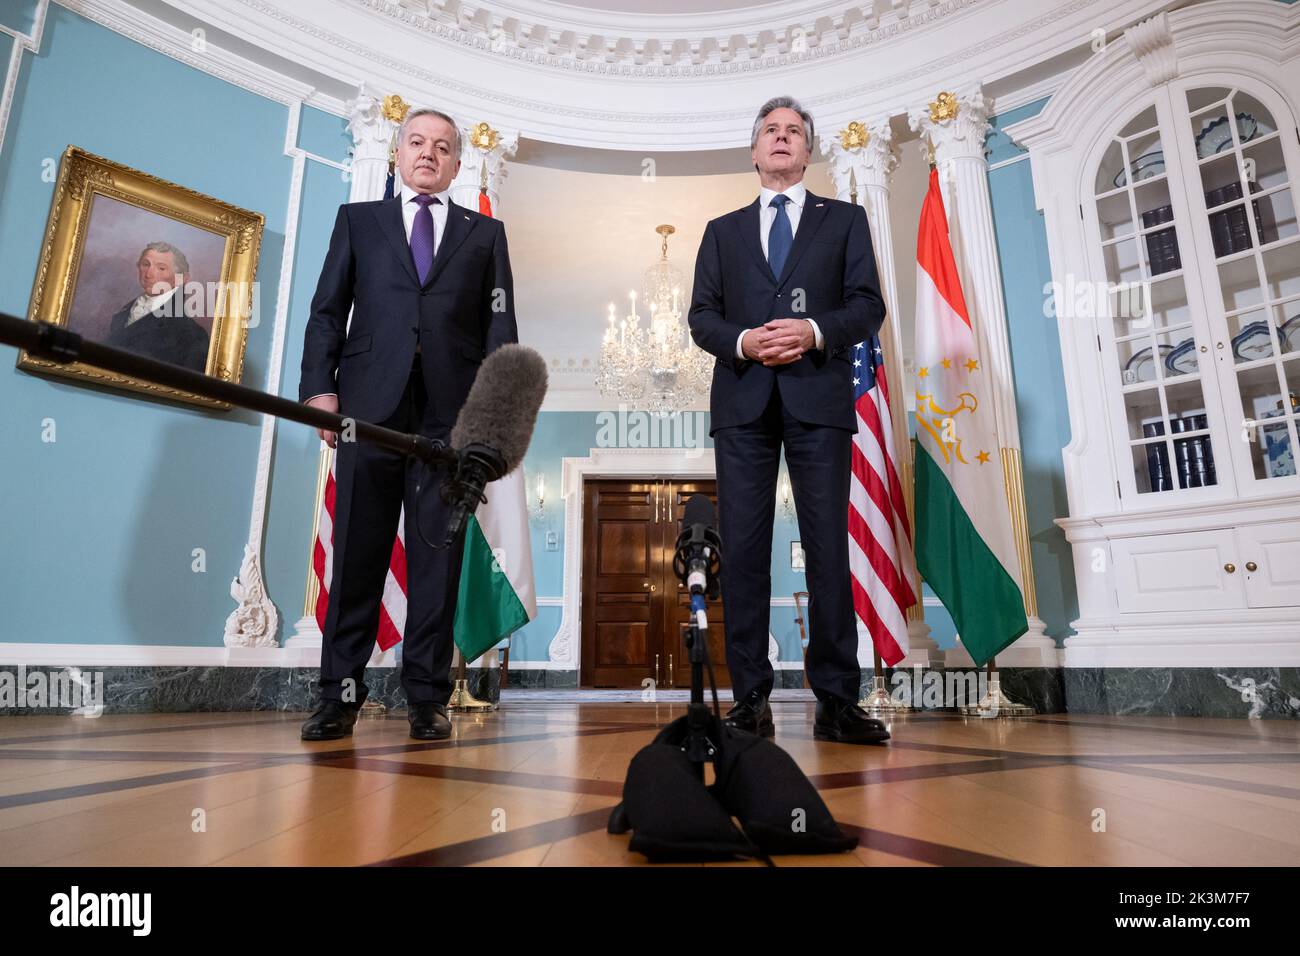 US Secretary of State Antony Blinken and Tajikistan Foreign Minister Sirojiddin Muhriddin (L) speak to the press prior to meetings at the State Department in Washington, DC, September 27, 2022. Saul Loeb/Pool via REUTERS Stock Photo